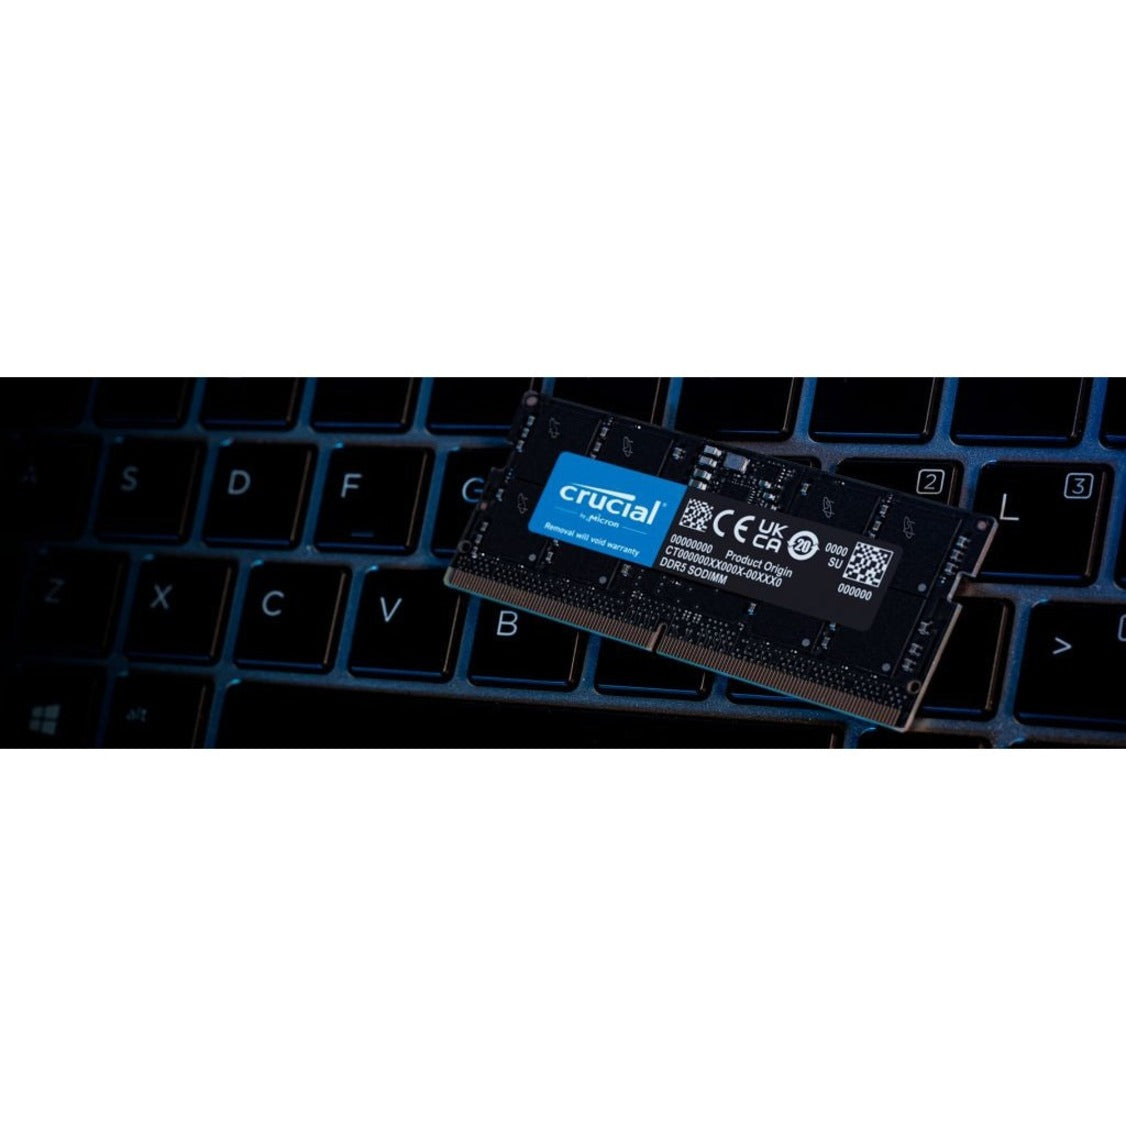 Crucial CT8G48C40S5 8GB DDR5 SDRAM Memory Module, High-Speed RAM for Improved Performance